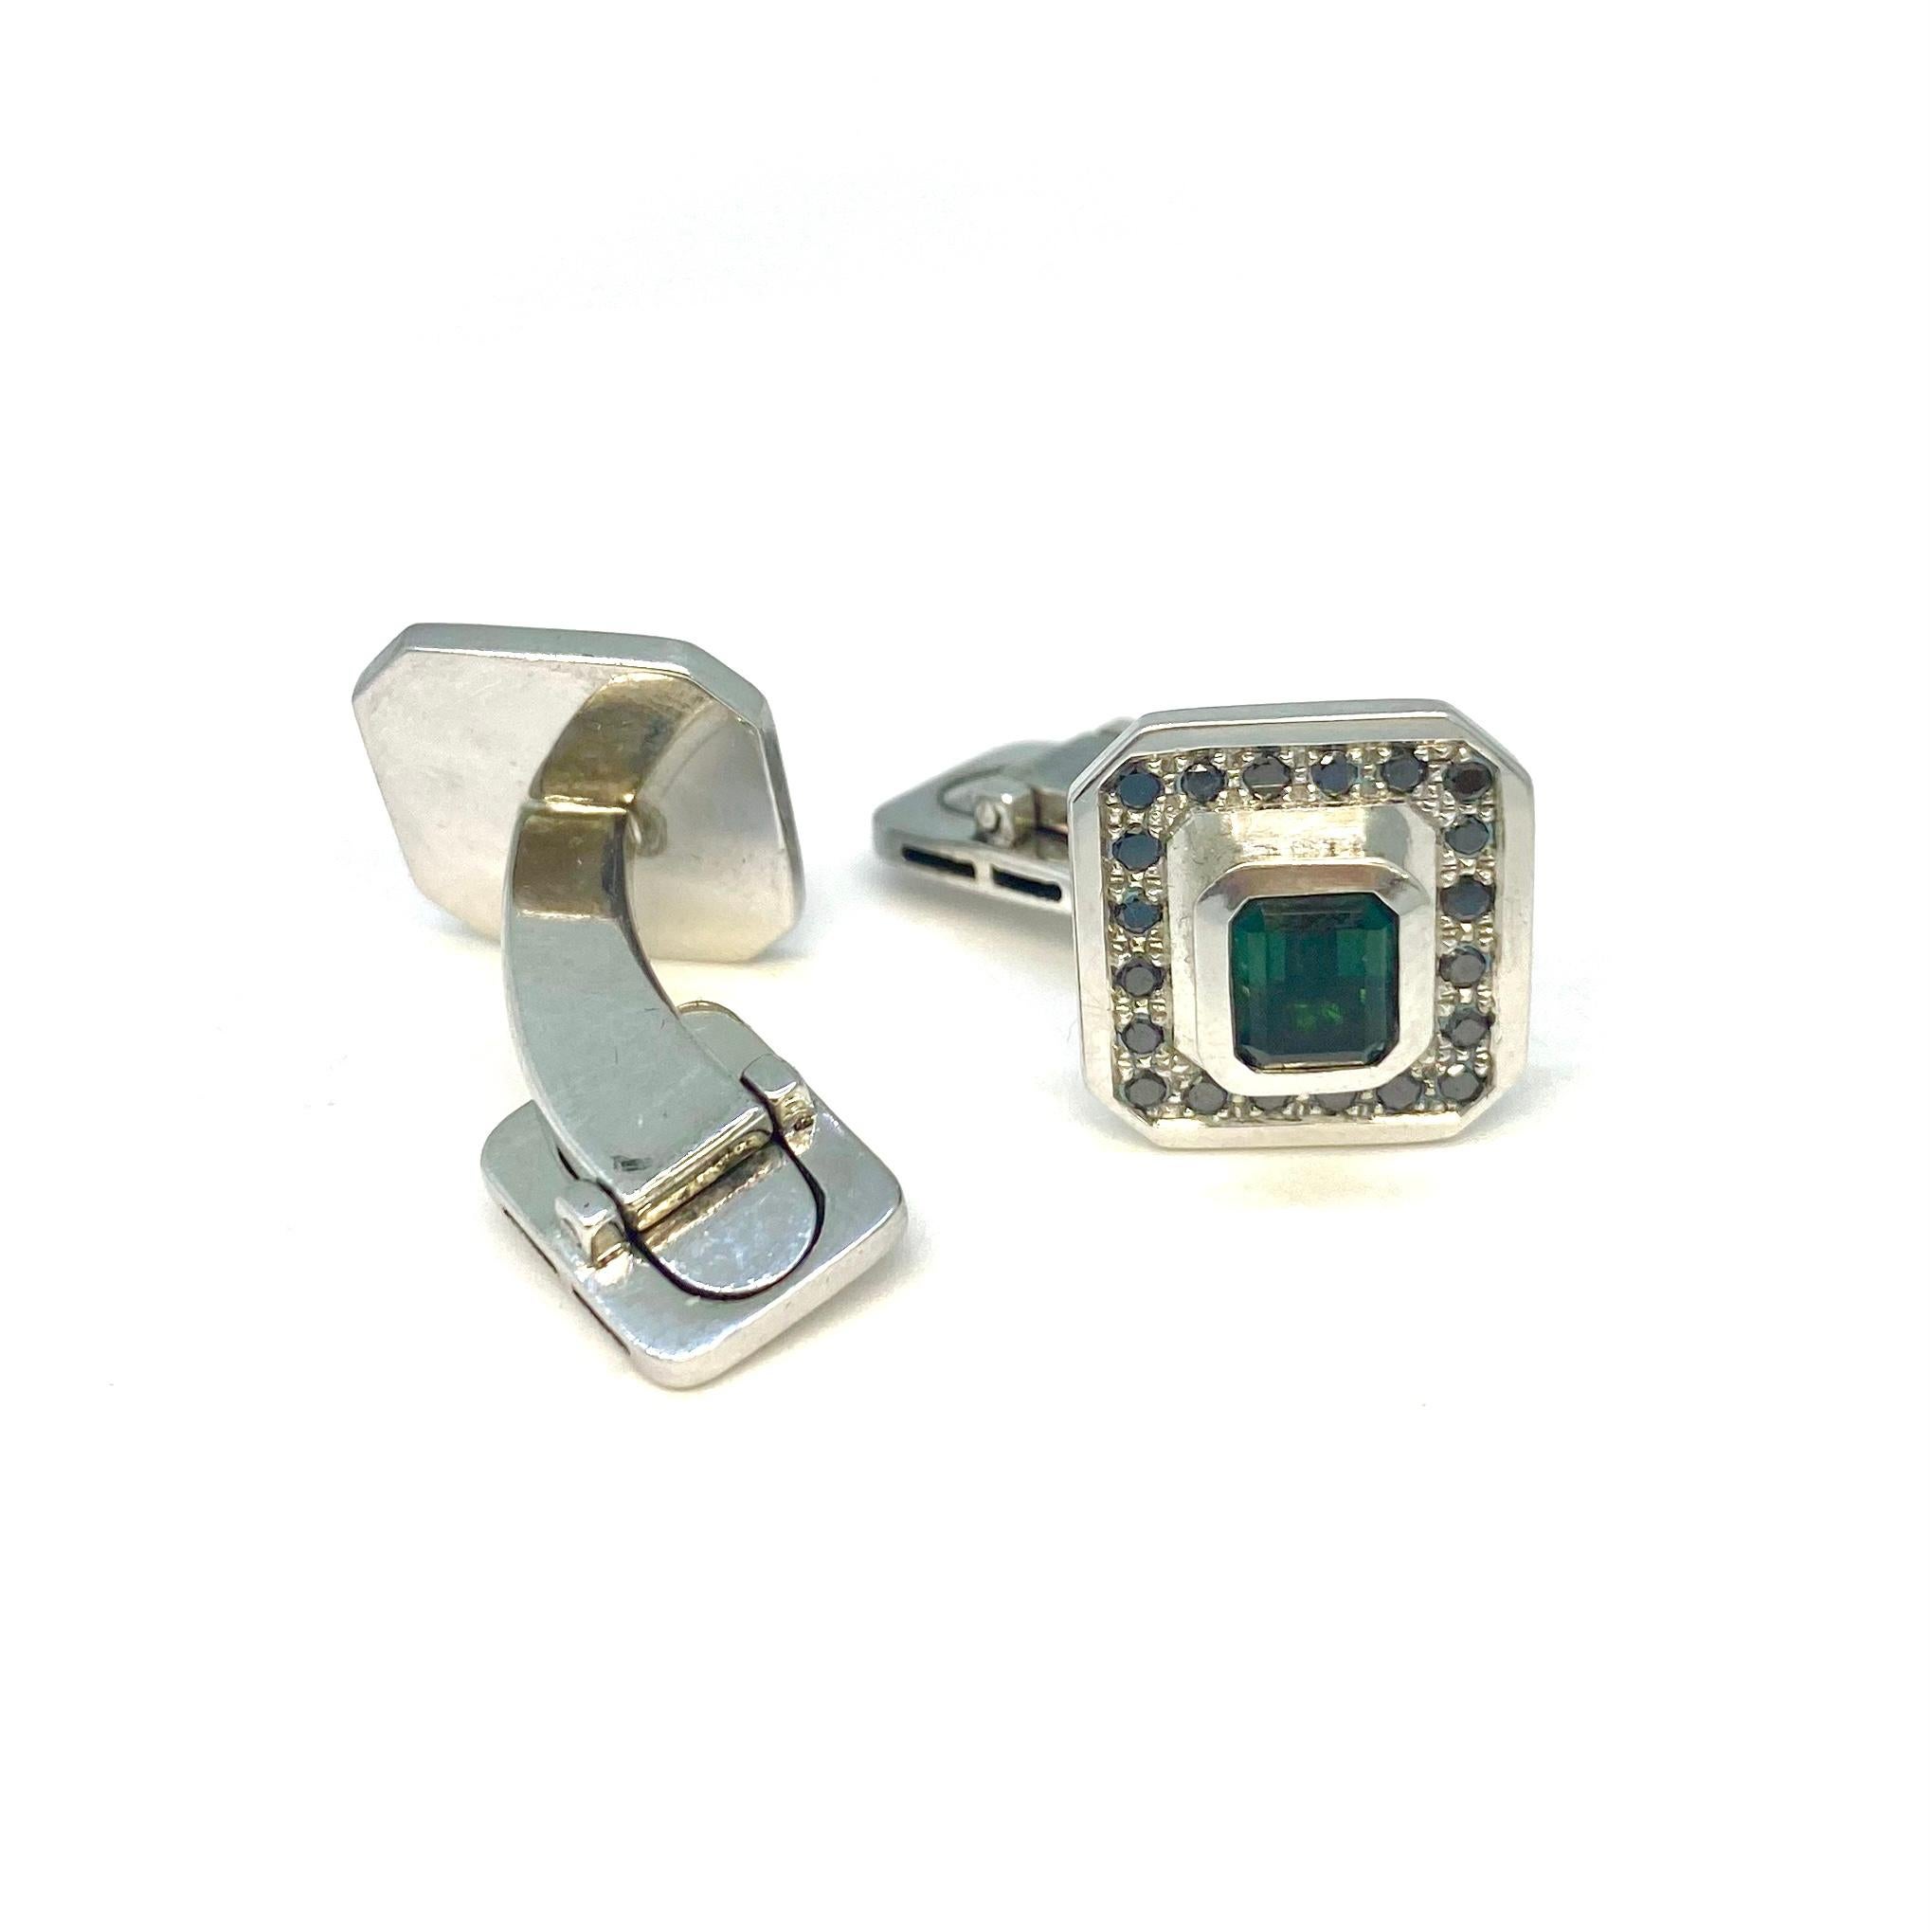 Cufflinks in polished white gold 750/ 18K with green, emerald cut tourmalines 2,3ct and 40 black brilliant cut diamonds 0,60ct.

Designed for the complete gentleman, our white gold black diamond cufflinks are the epitome of refined elegance. These